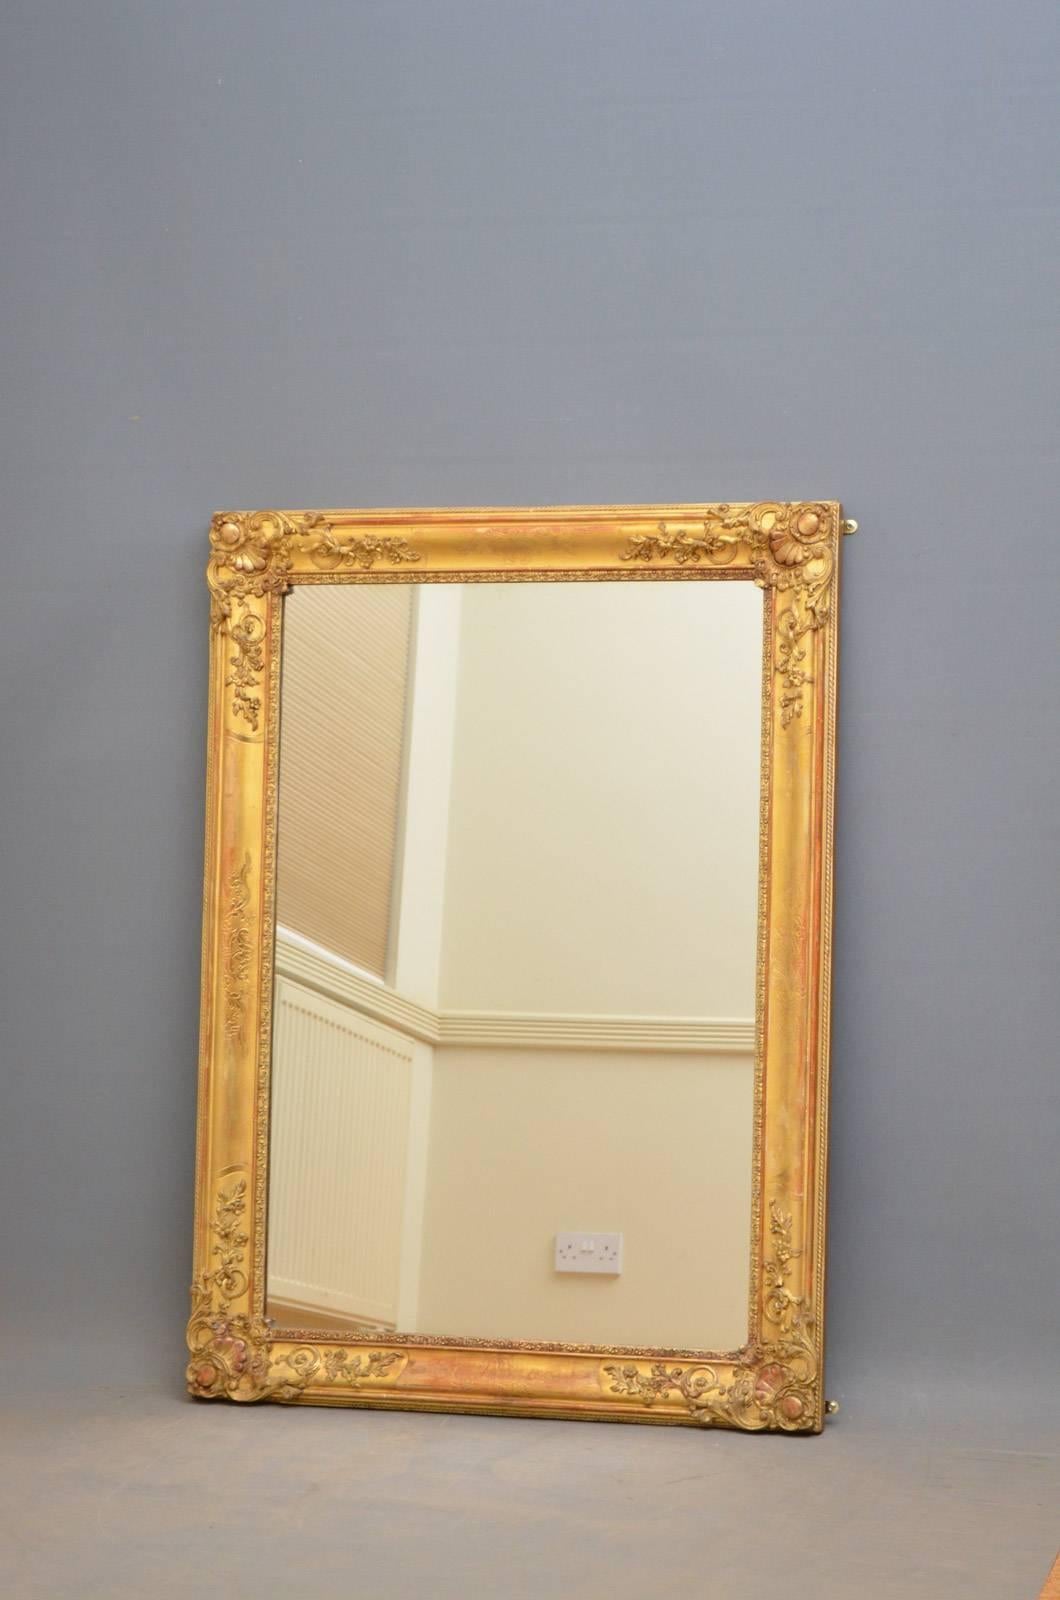 Sn4267, a 19th century French mirror of versatile form could be positioned portrait or landscape, having original mirror plate with some foxing in beautifully carved and gilded frame. This antique gilt mirror has been sympathetically restored, is in